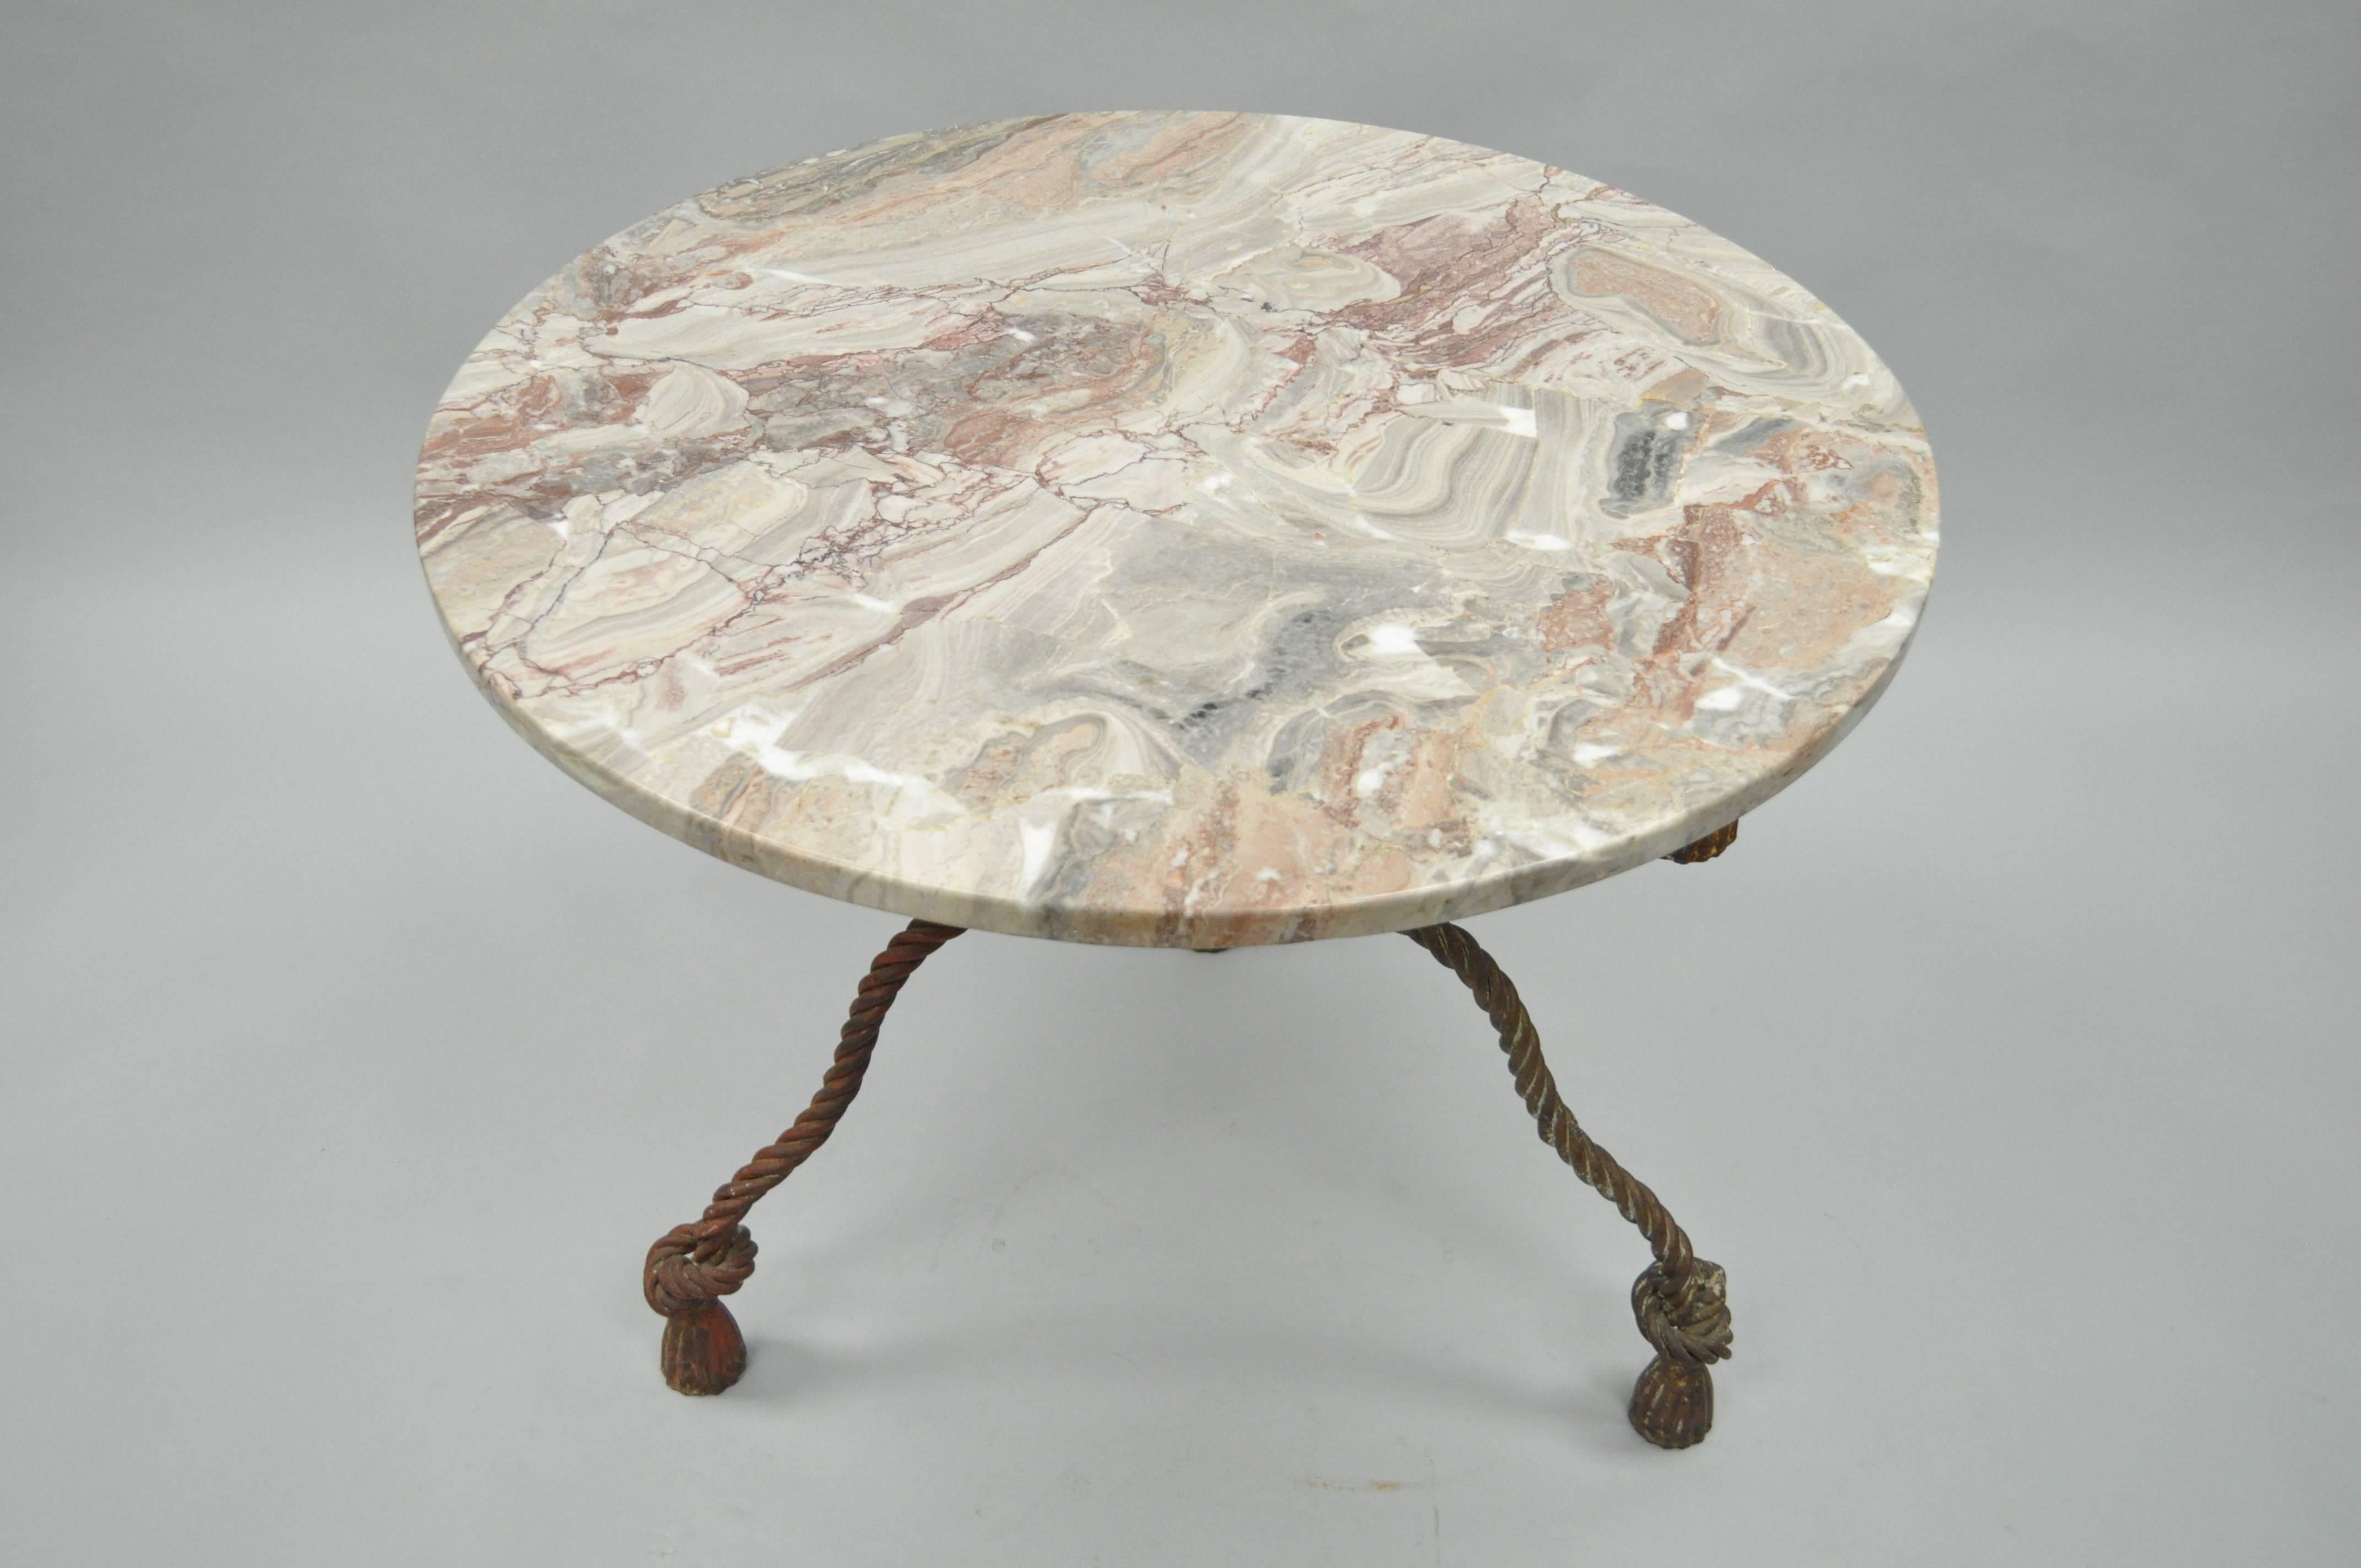 Hollywood Regency 1940s Italian Marble-Top Rope Turned Round Tassel Form Iron Center Table